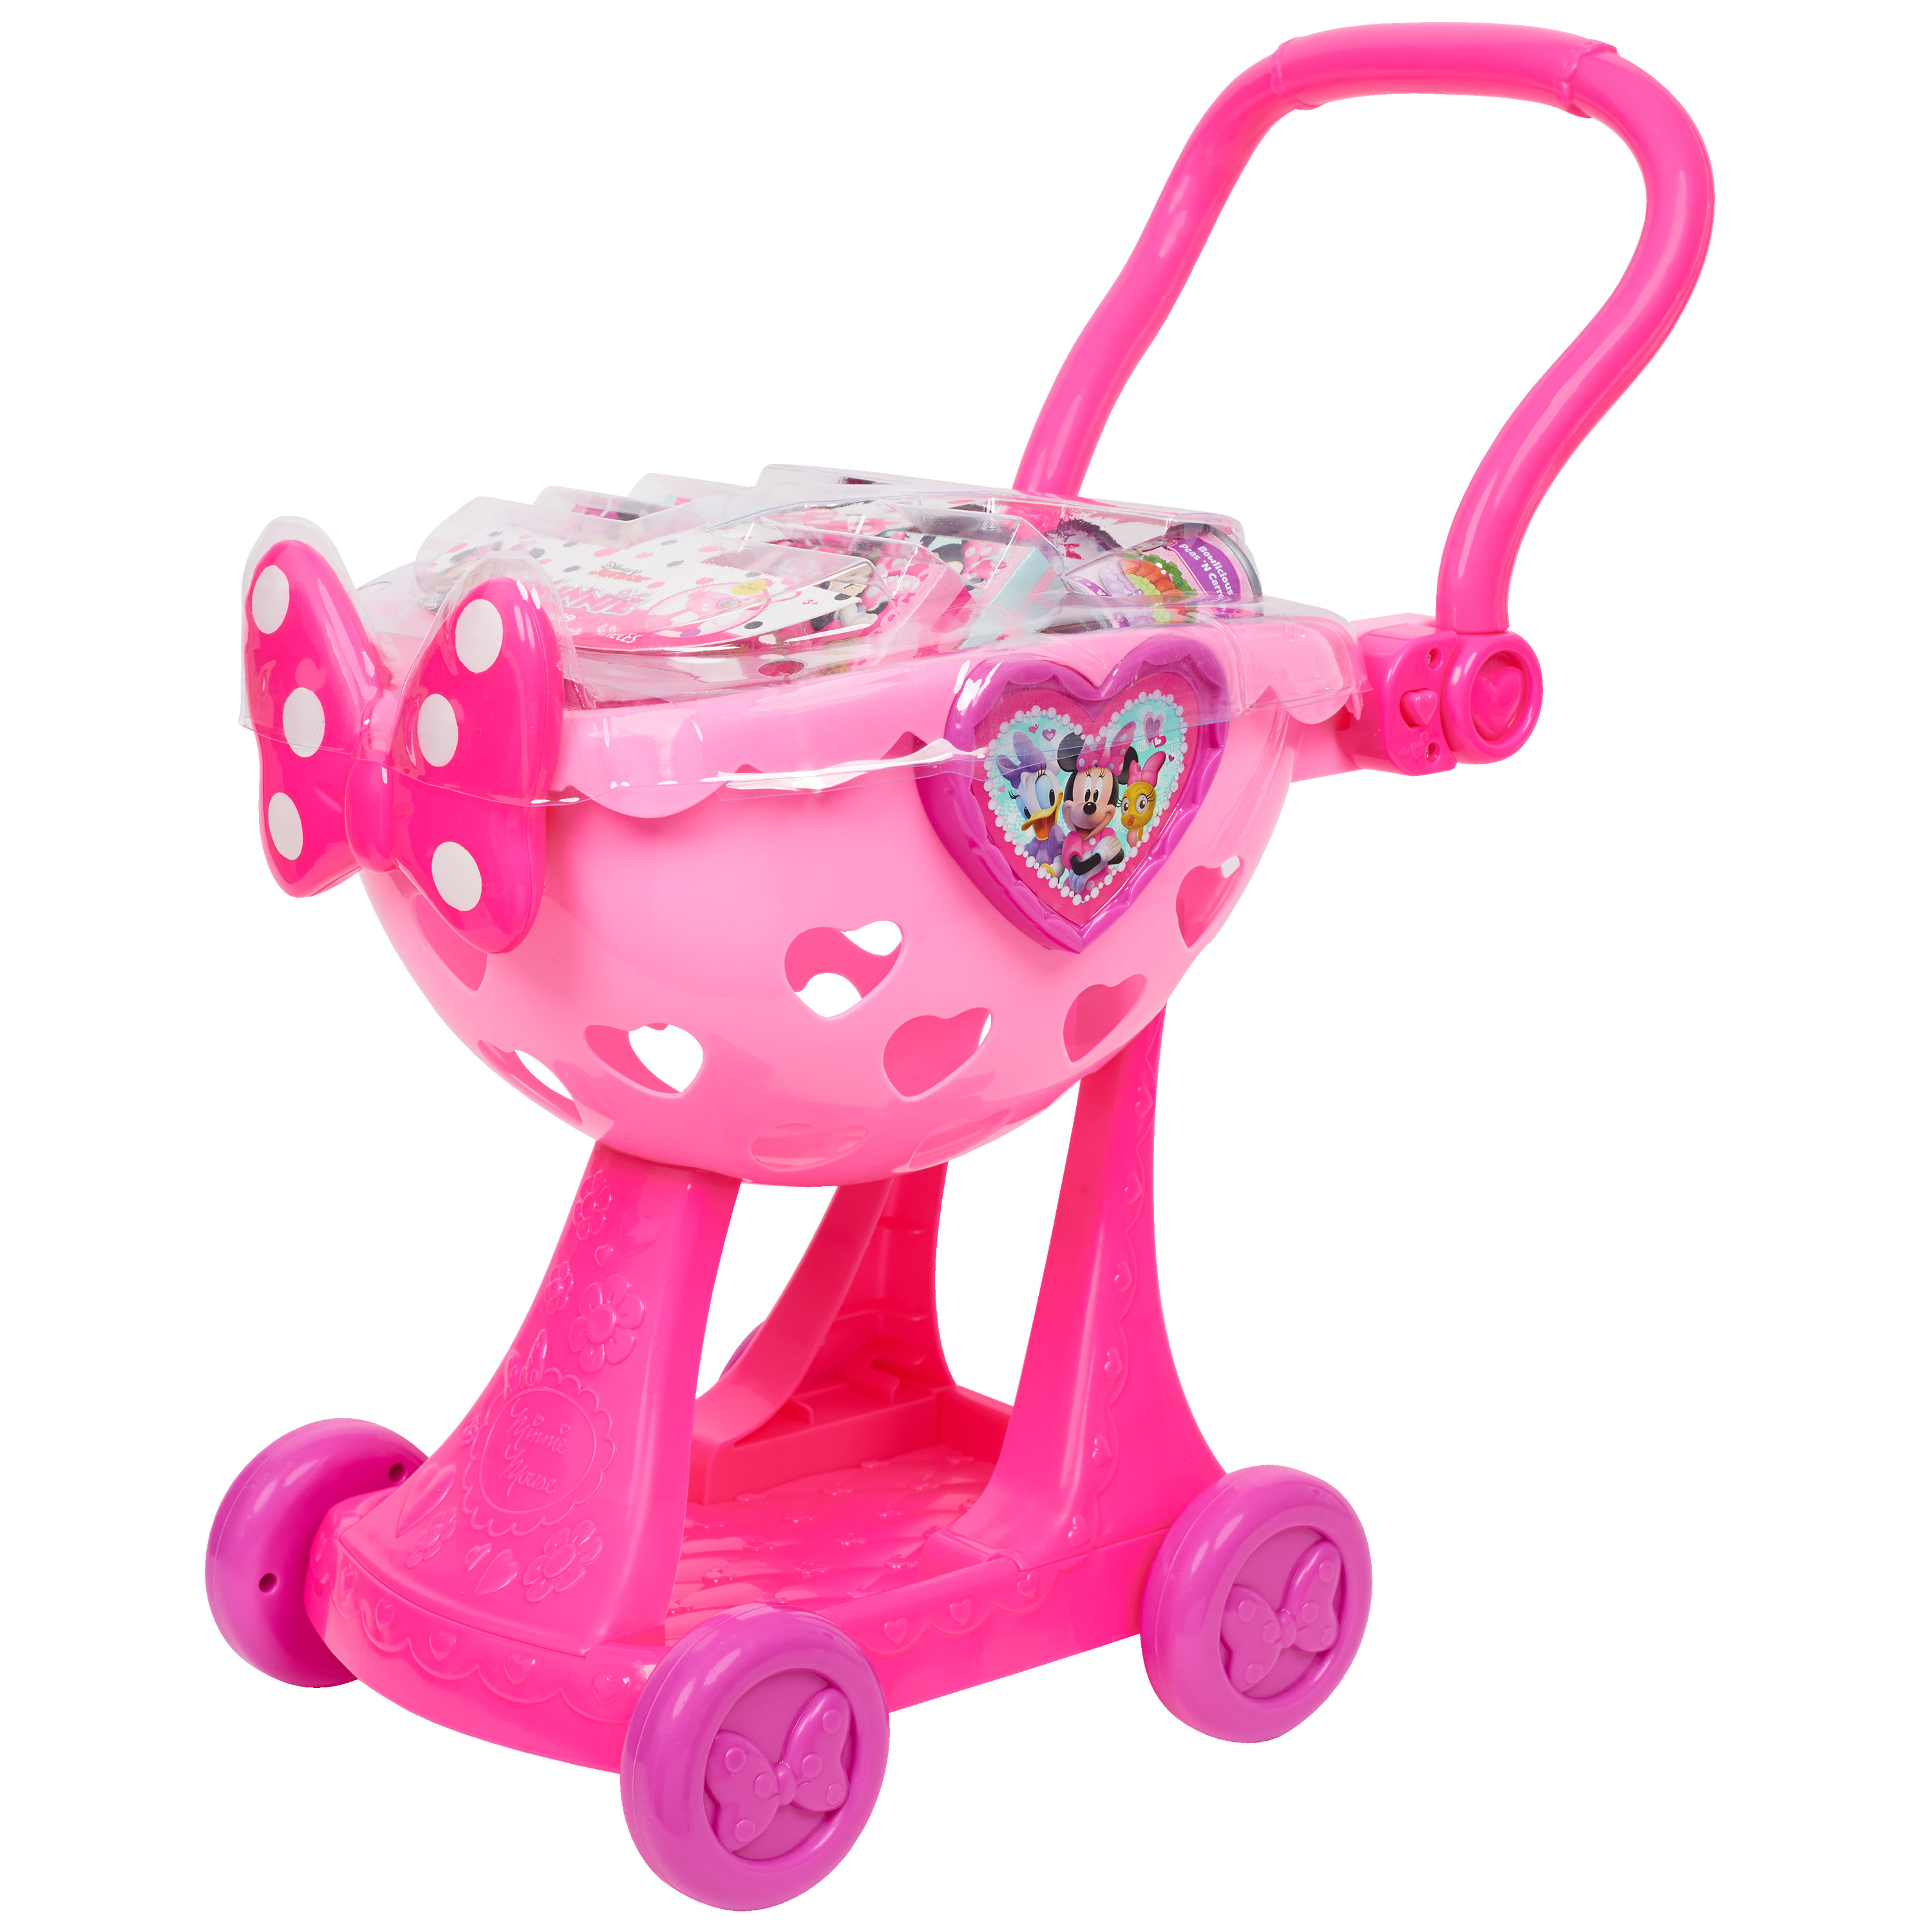 Minnie's Happy Helpers Bowtique Shopping Cart, Dress Up and Pretend Play, Officially Licensed Kids Toys for Ages 3 Up, Gifts and Presents - image 1 of 9